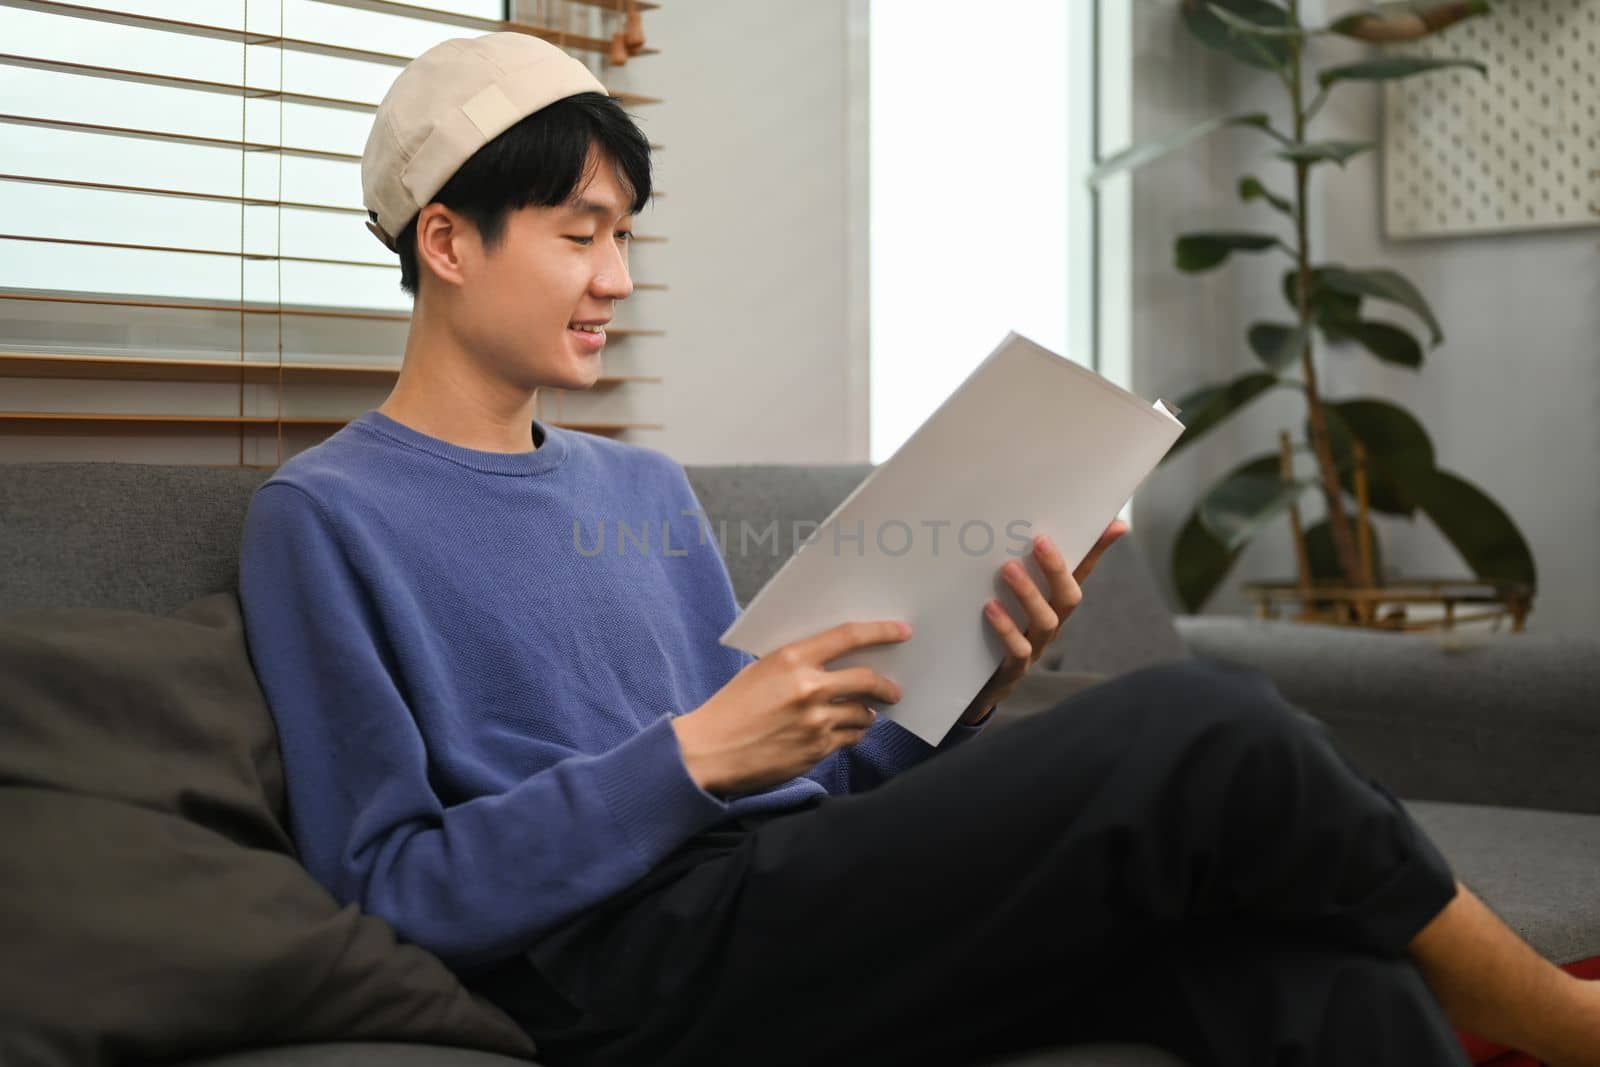 Pleasant man in stylish outfit enjoying reading new novel, relaxing on couch at home.